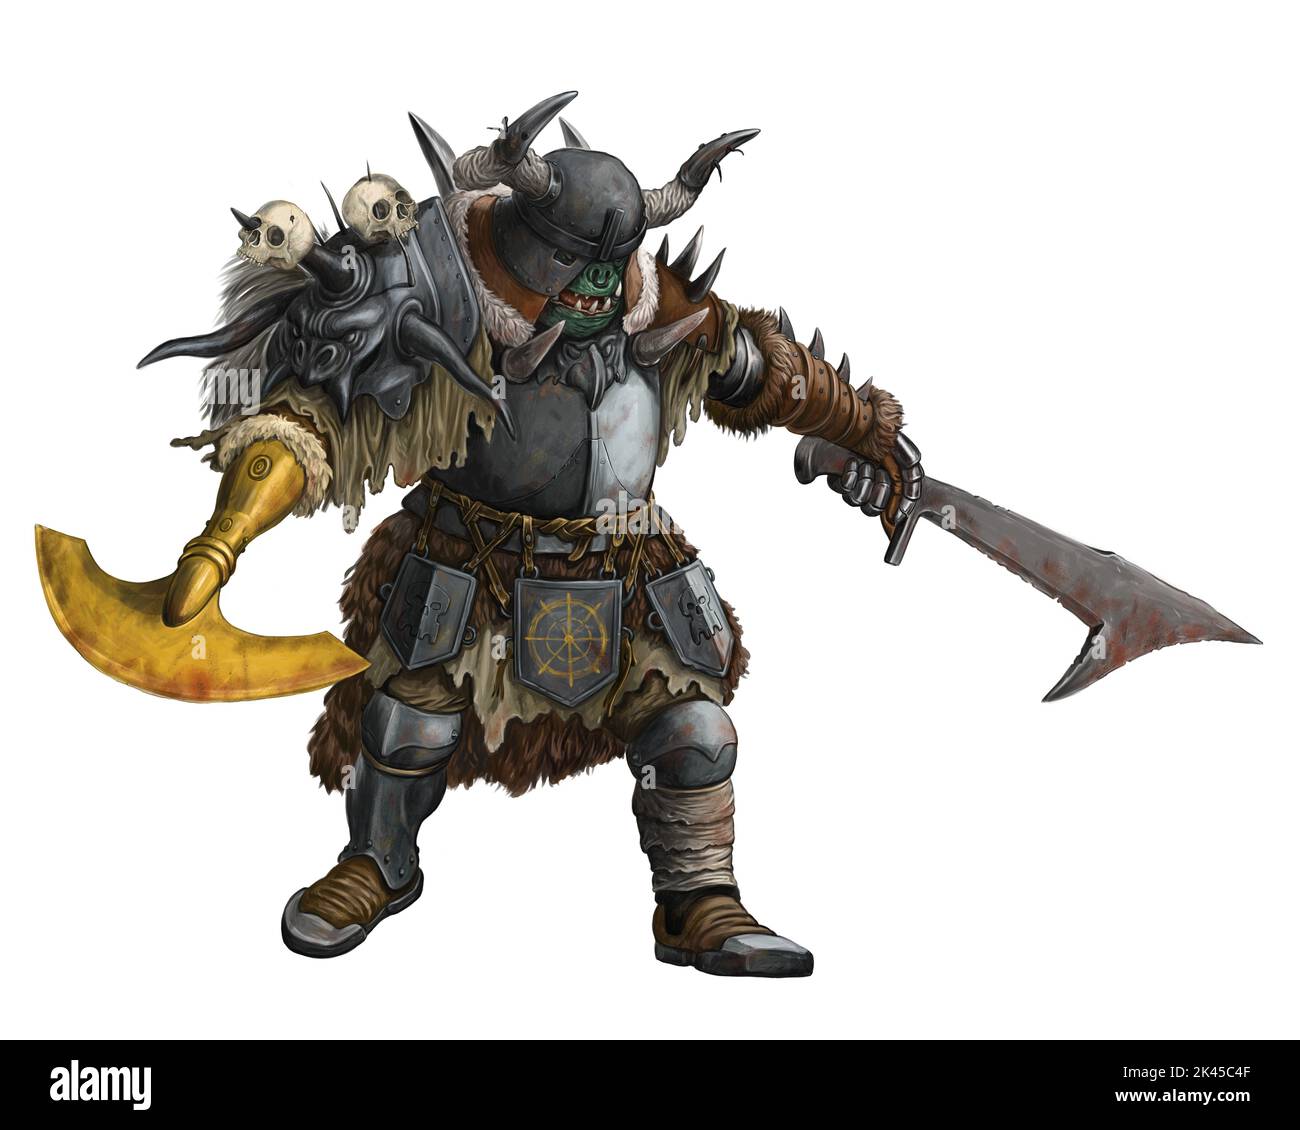 Fantasy creature - orc warrior attack. Fantasy illustration. Goblin with ax drawing. Stock Photo